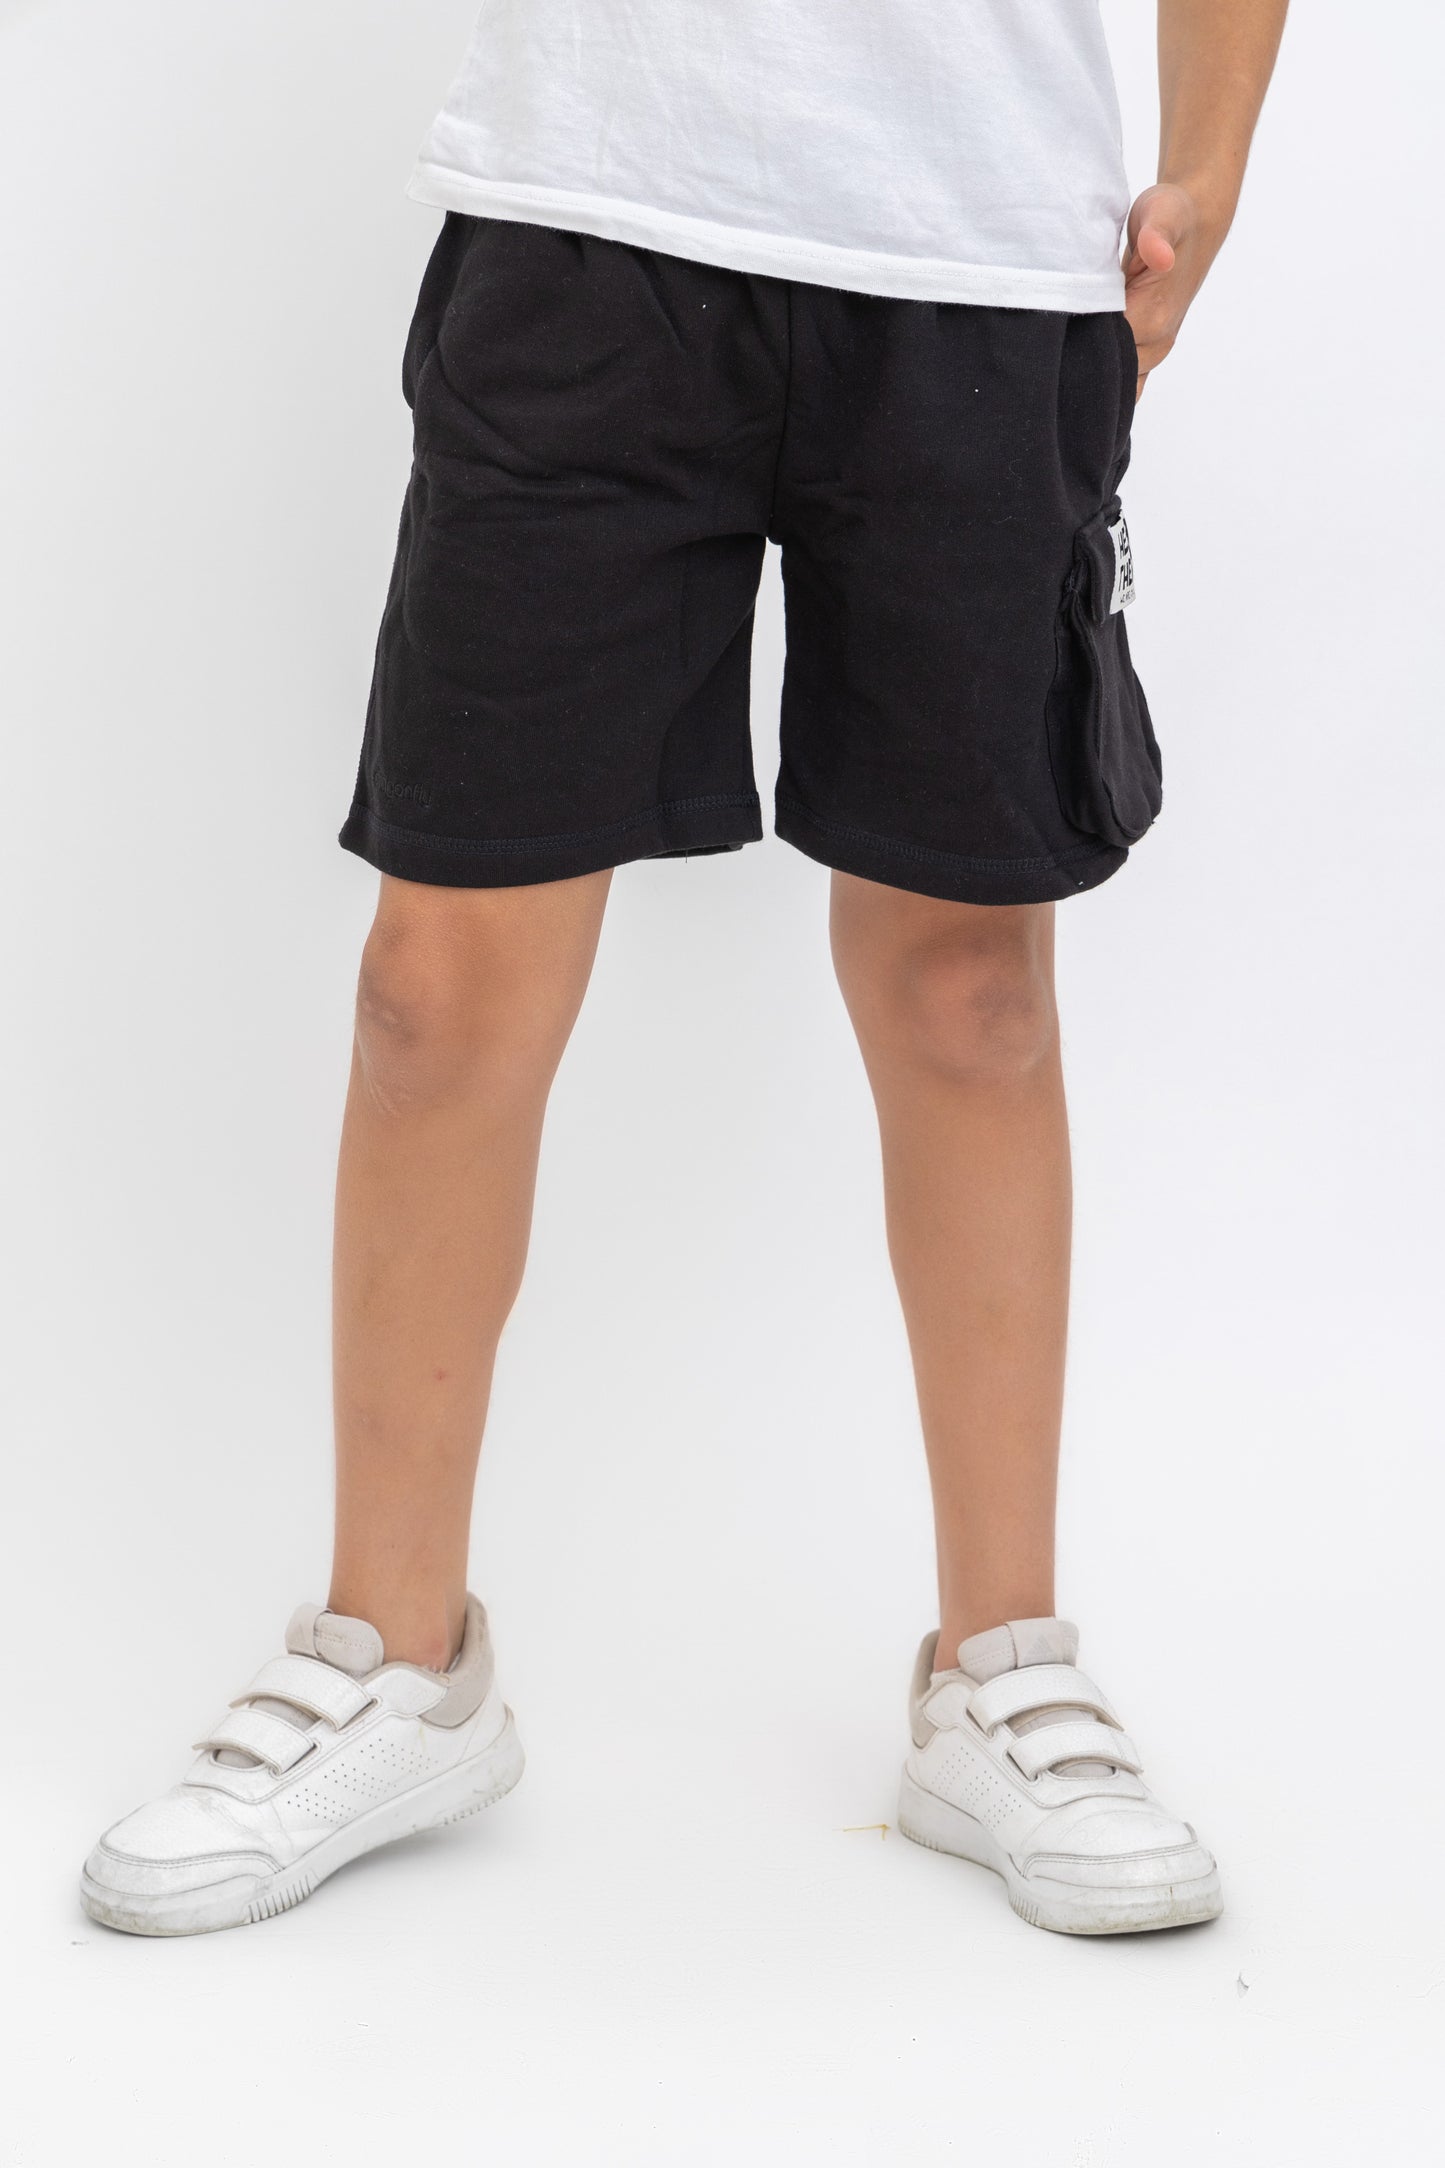 Black Hello There! Shorts